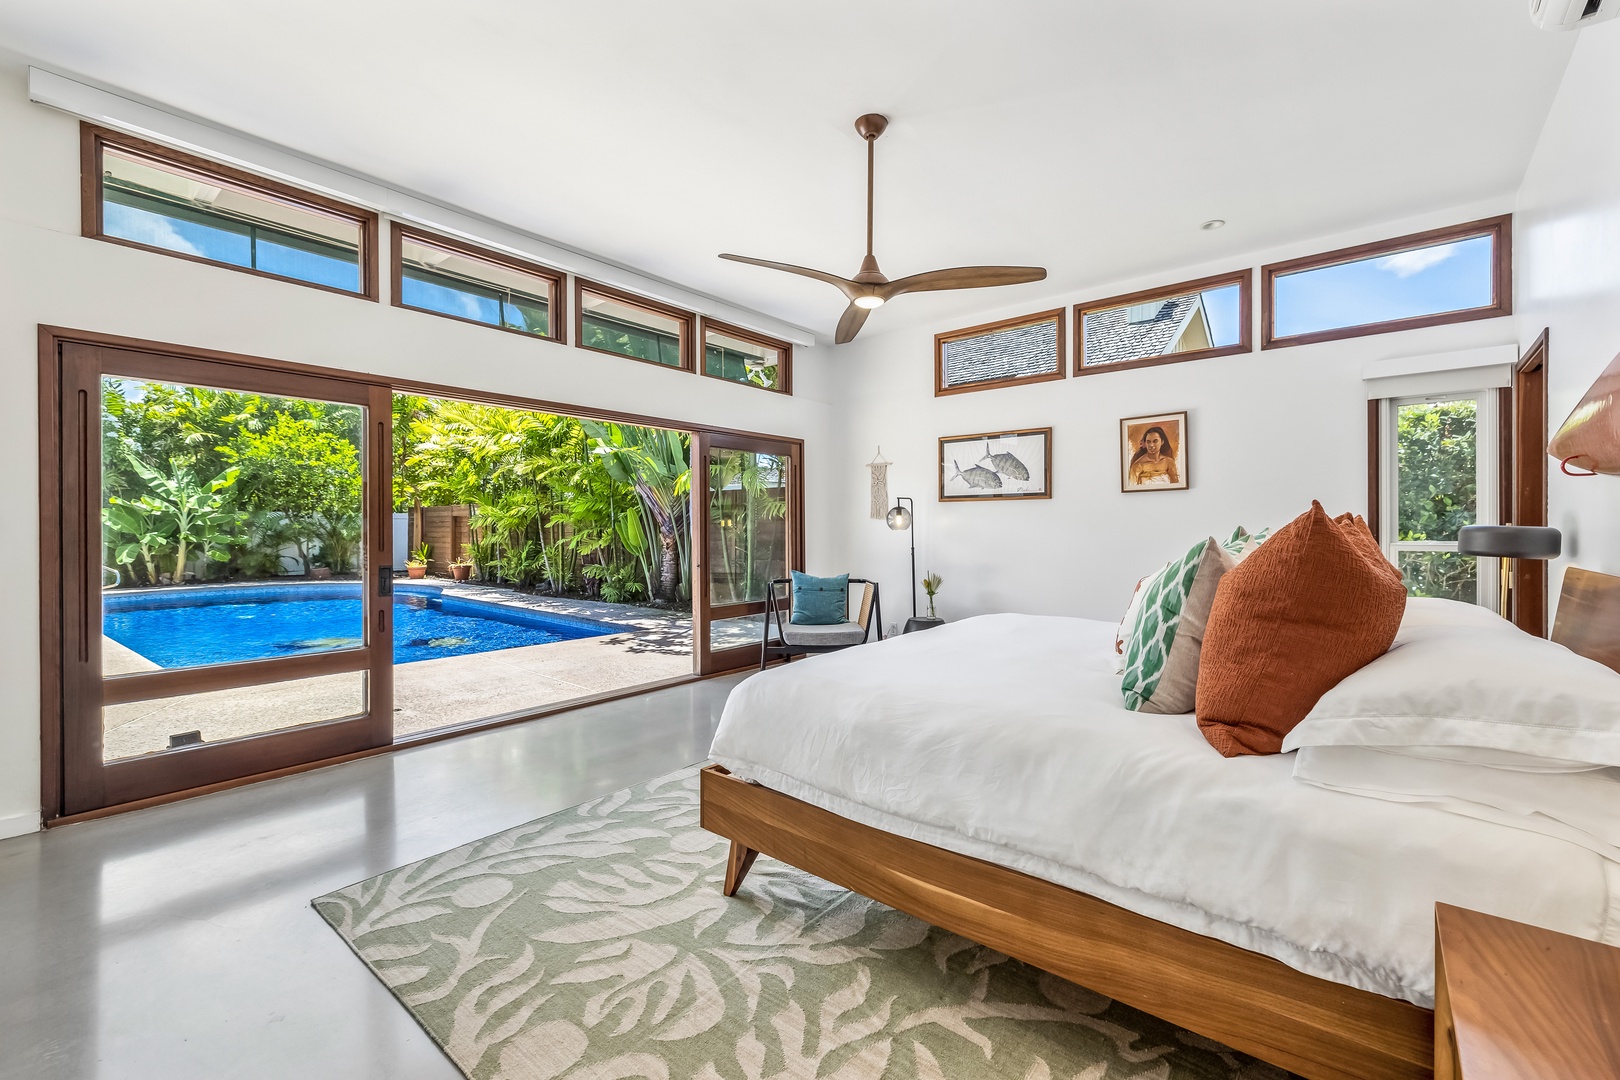 Kailua Vacation Rentals, Lokomaika'i Kailua - Primary bedroom with walk in closet and ensuite and pool views!